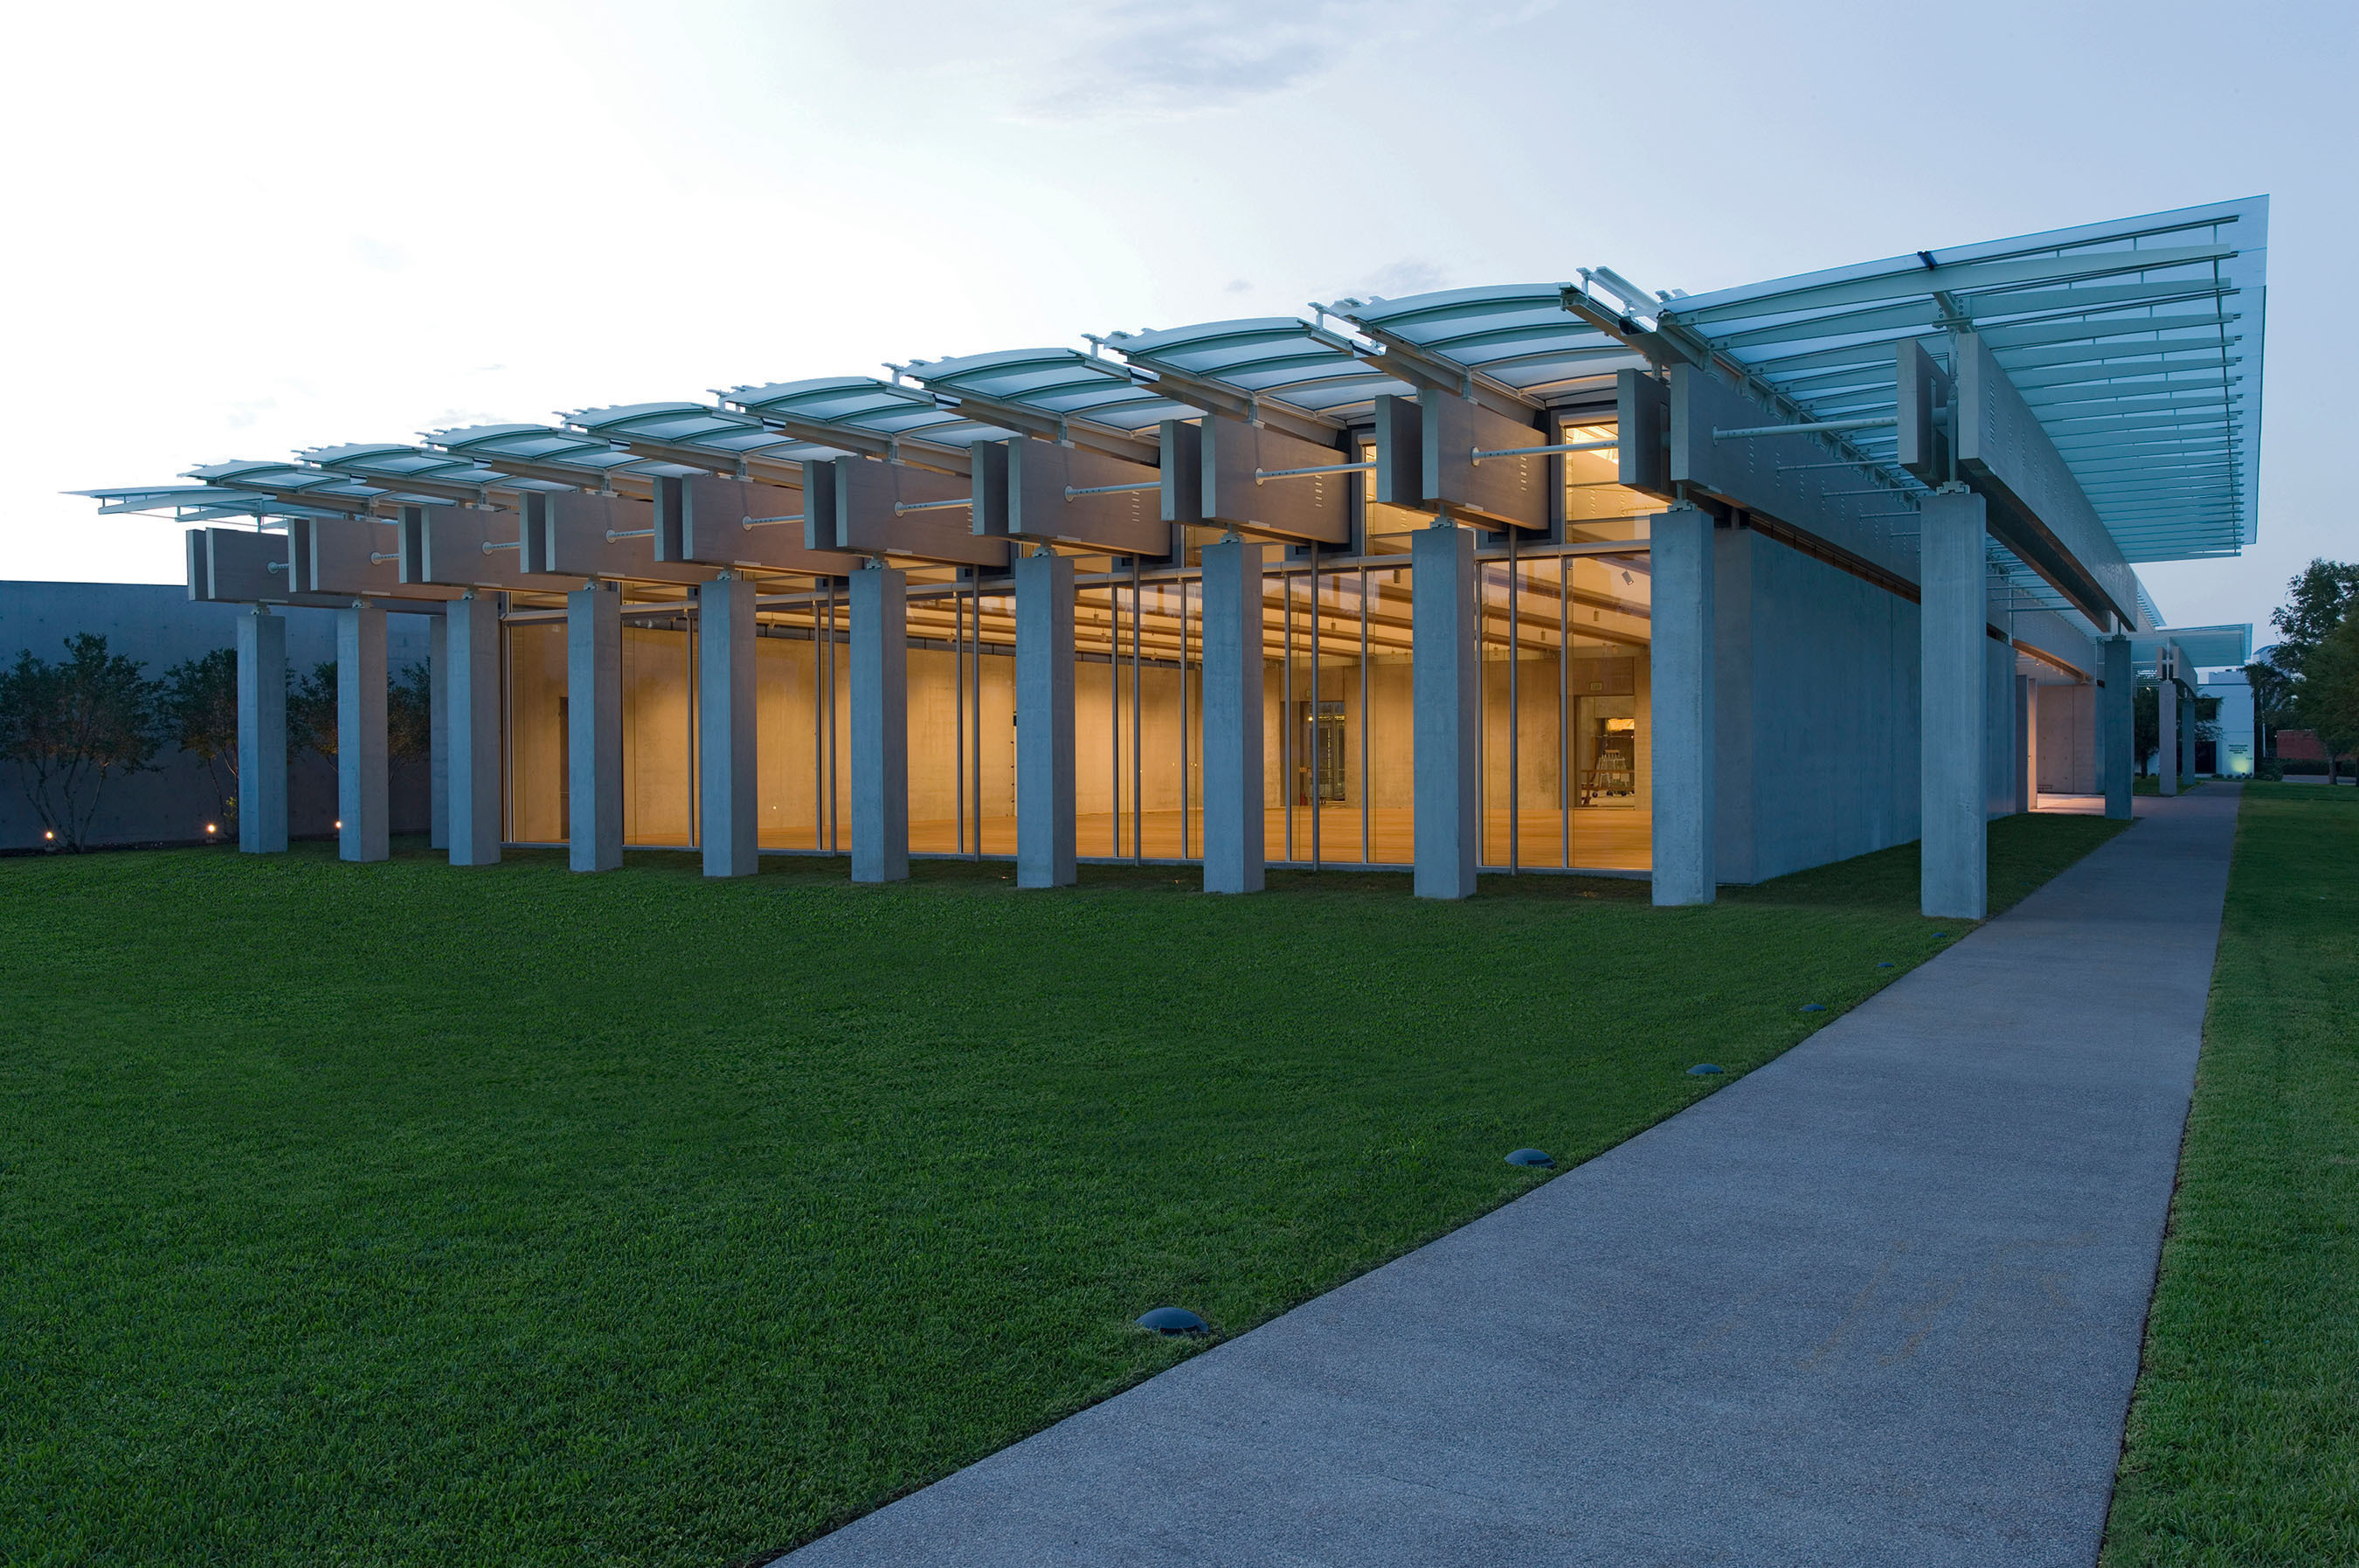 South view, Renzo Piano Pavilion, September 2013. Kimbell Art Museum, Fort Worth, Texas. Photo by Robert Polidori. (PRNewsFoto/Kimbell Art Museum) (PRNewsFoto/KIMBELL ART MUSEUM)